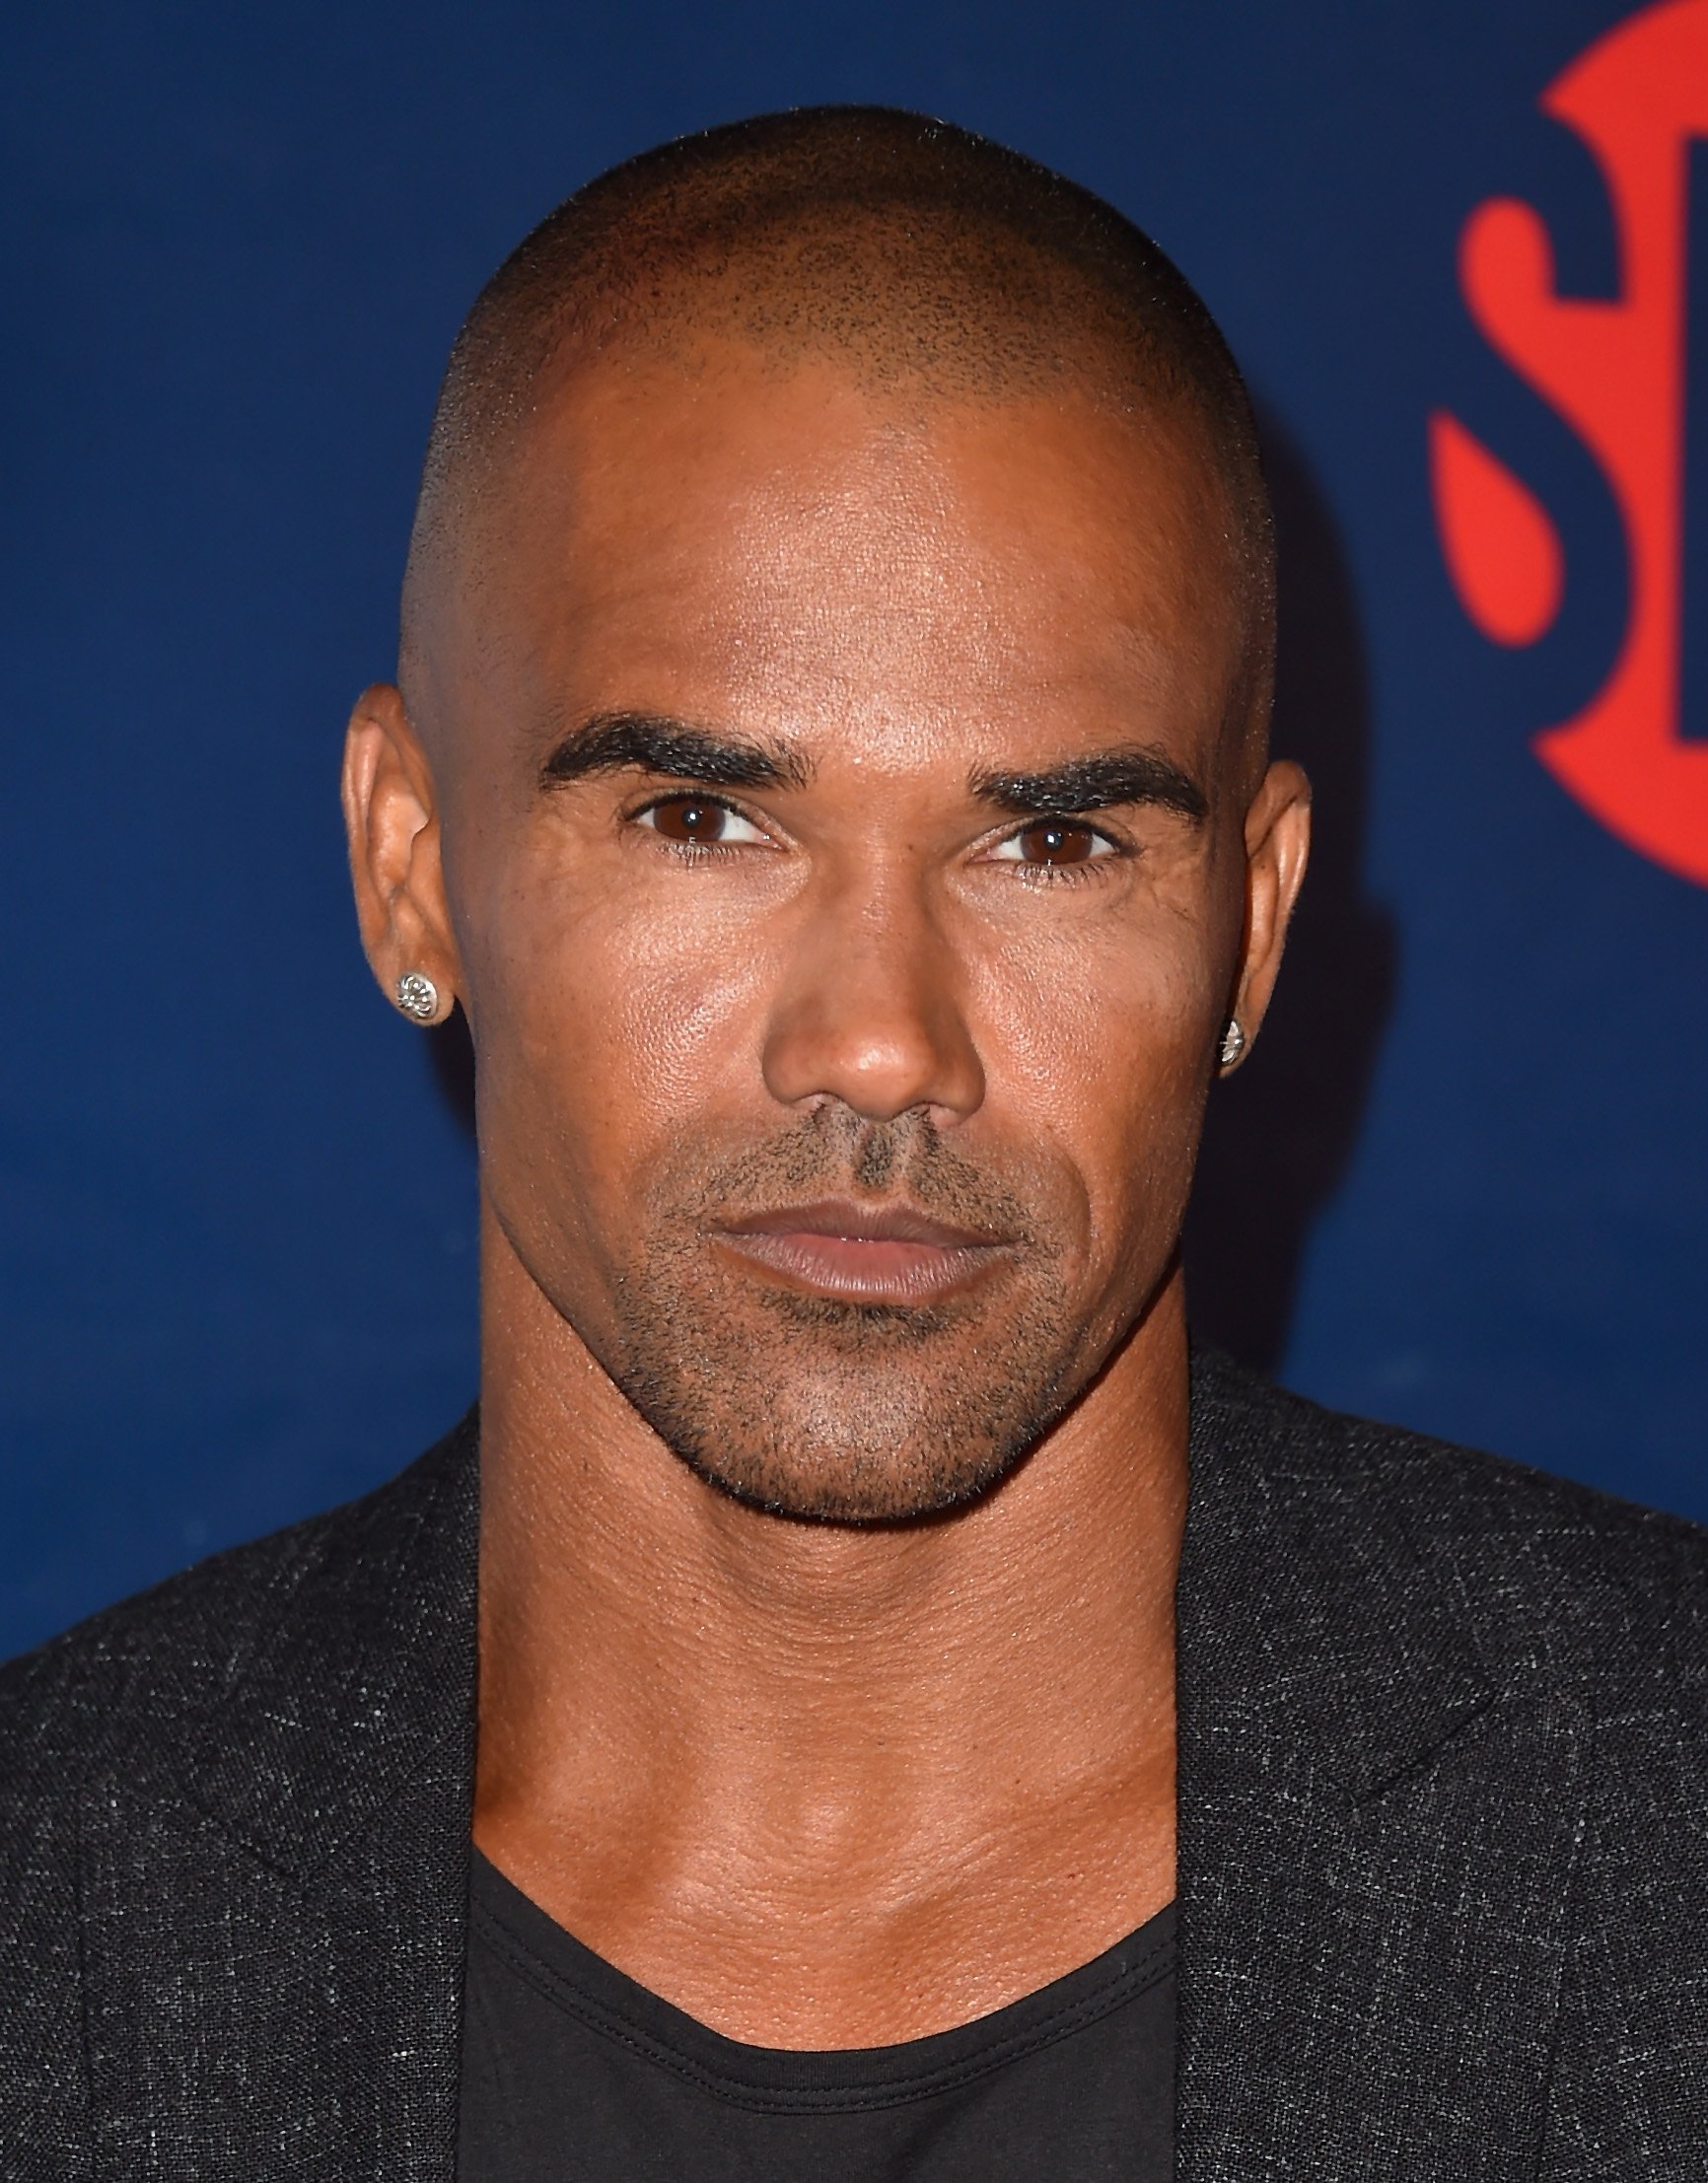 Shemar Moore attends CBS' 2015 Summer TCA party at the Pacific Design Center on August 10, 2015 in West Hollywood, California. | Source: Getty Images